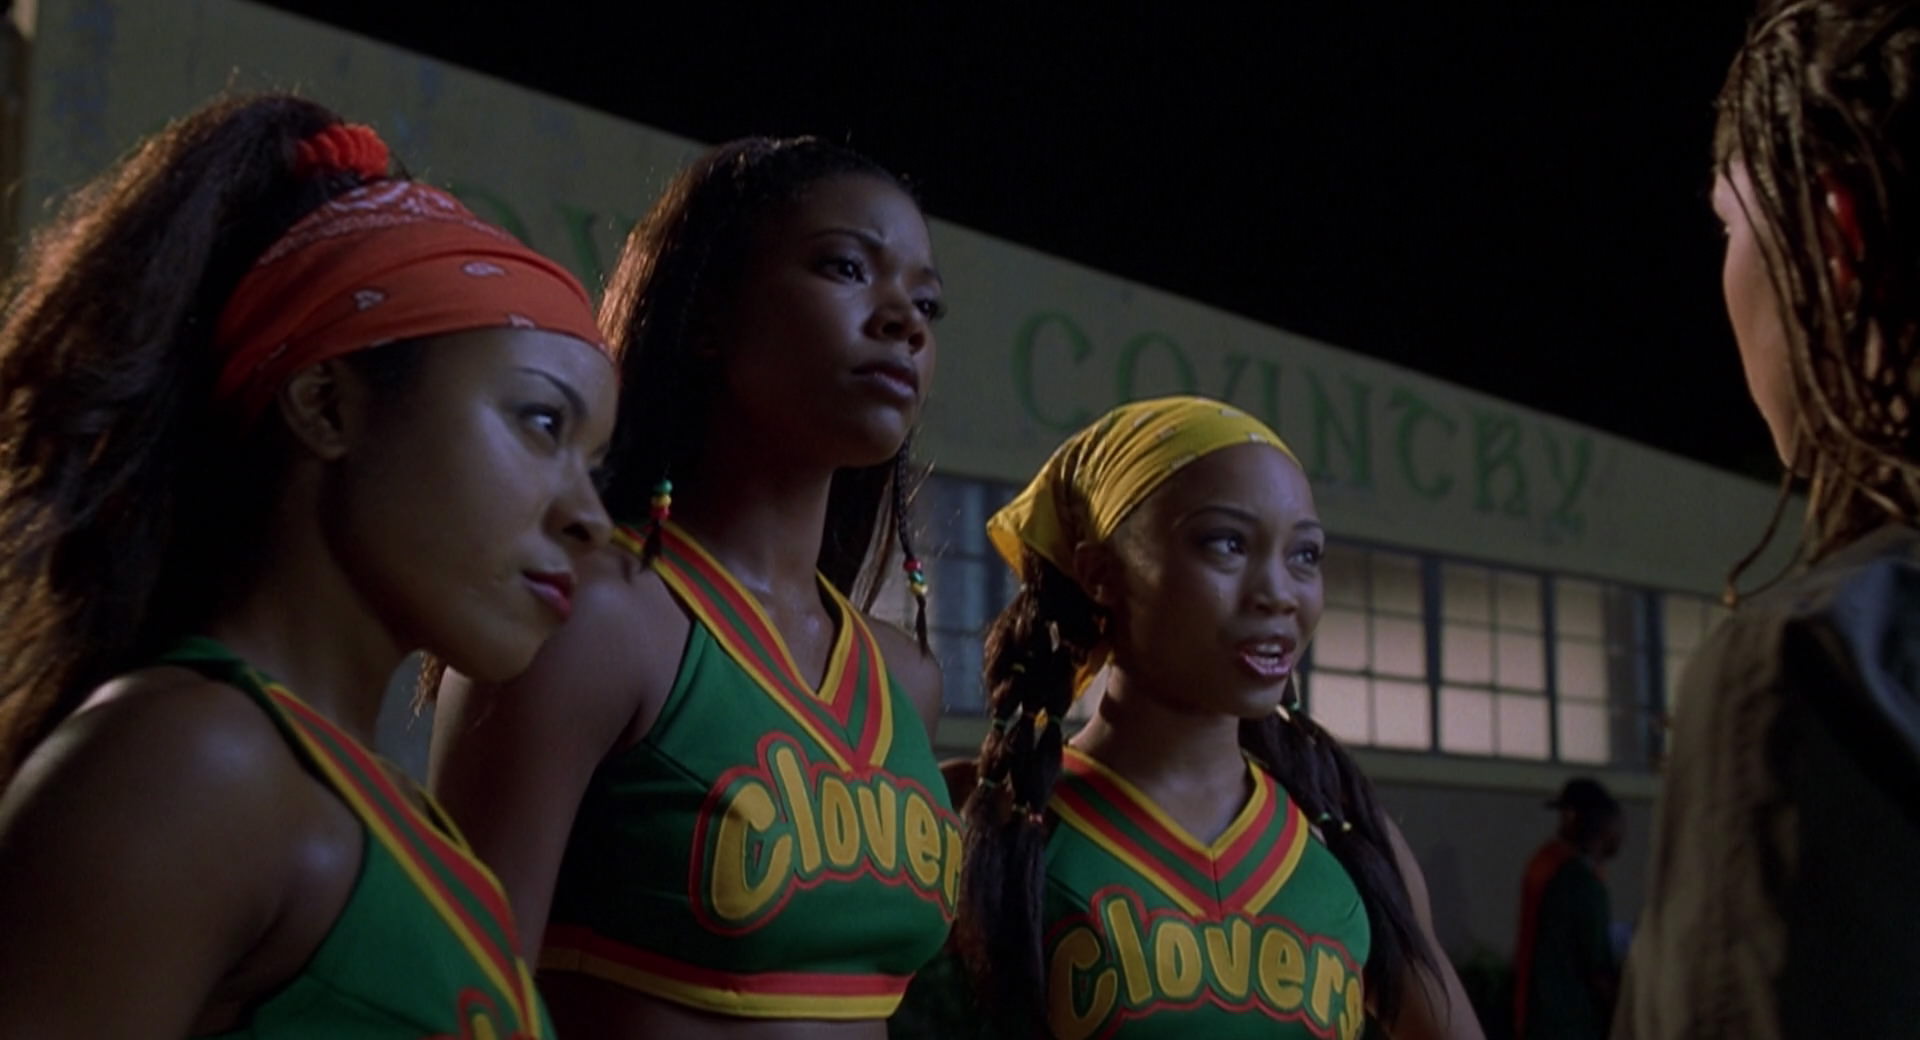 Members of the Compton Clovers cheer squad confront the Rancho Carne Toros about stealing their dance moves in a now iconic scene from "Bring It On."